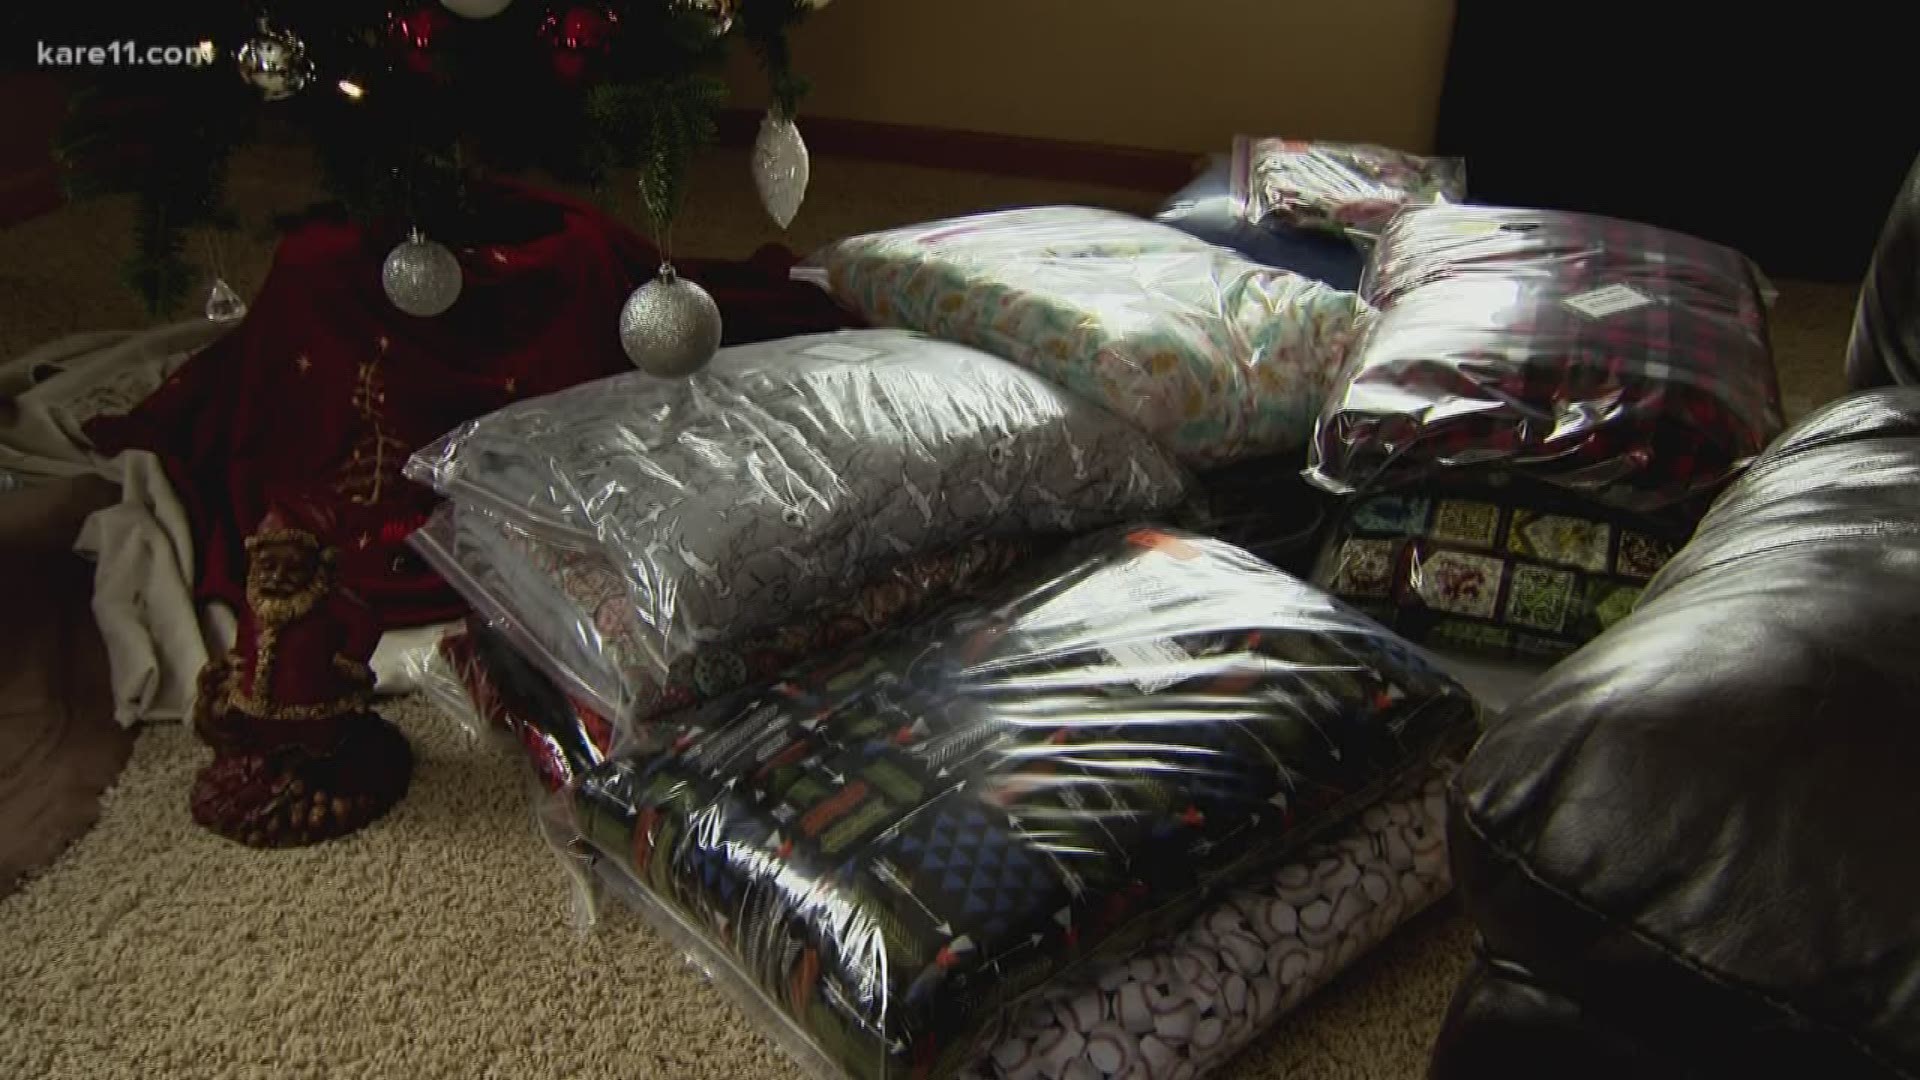 Weighted blankets have risen in popularity in recent years but are they worth the money?